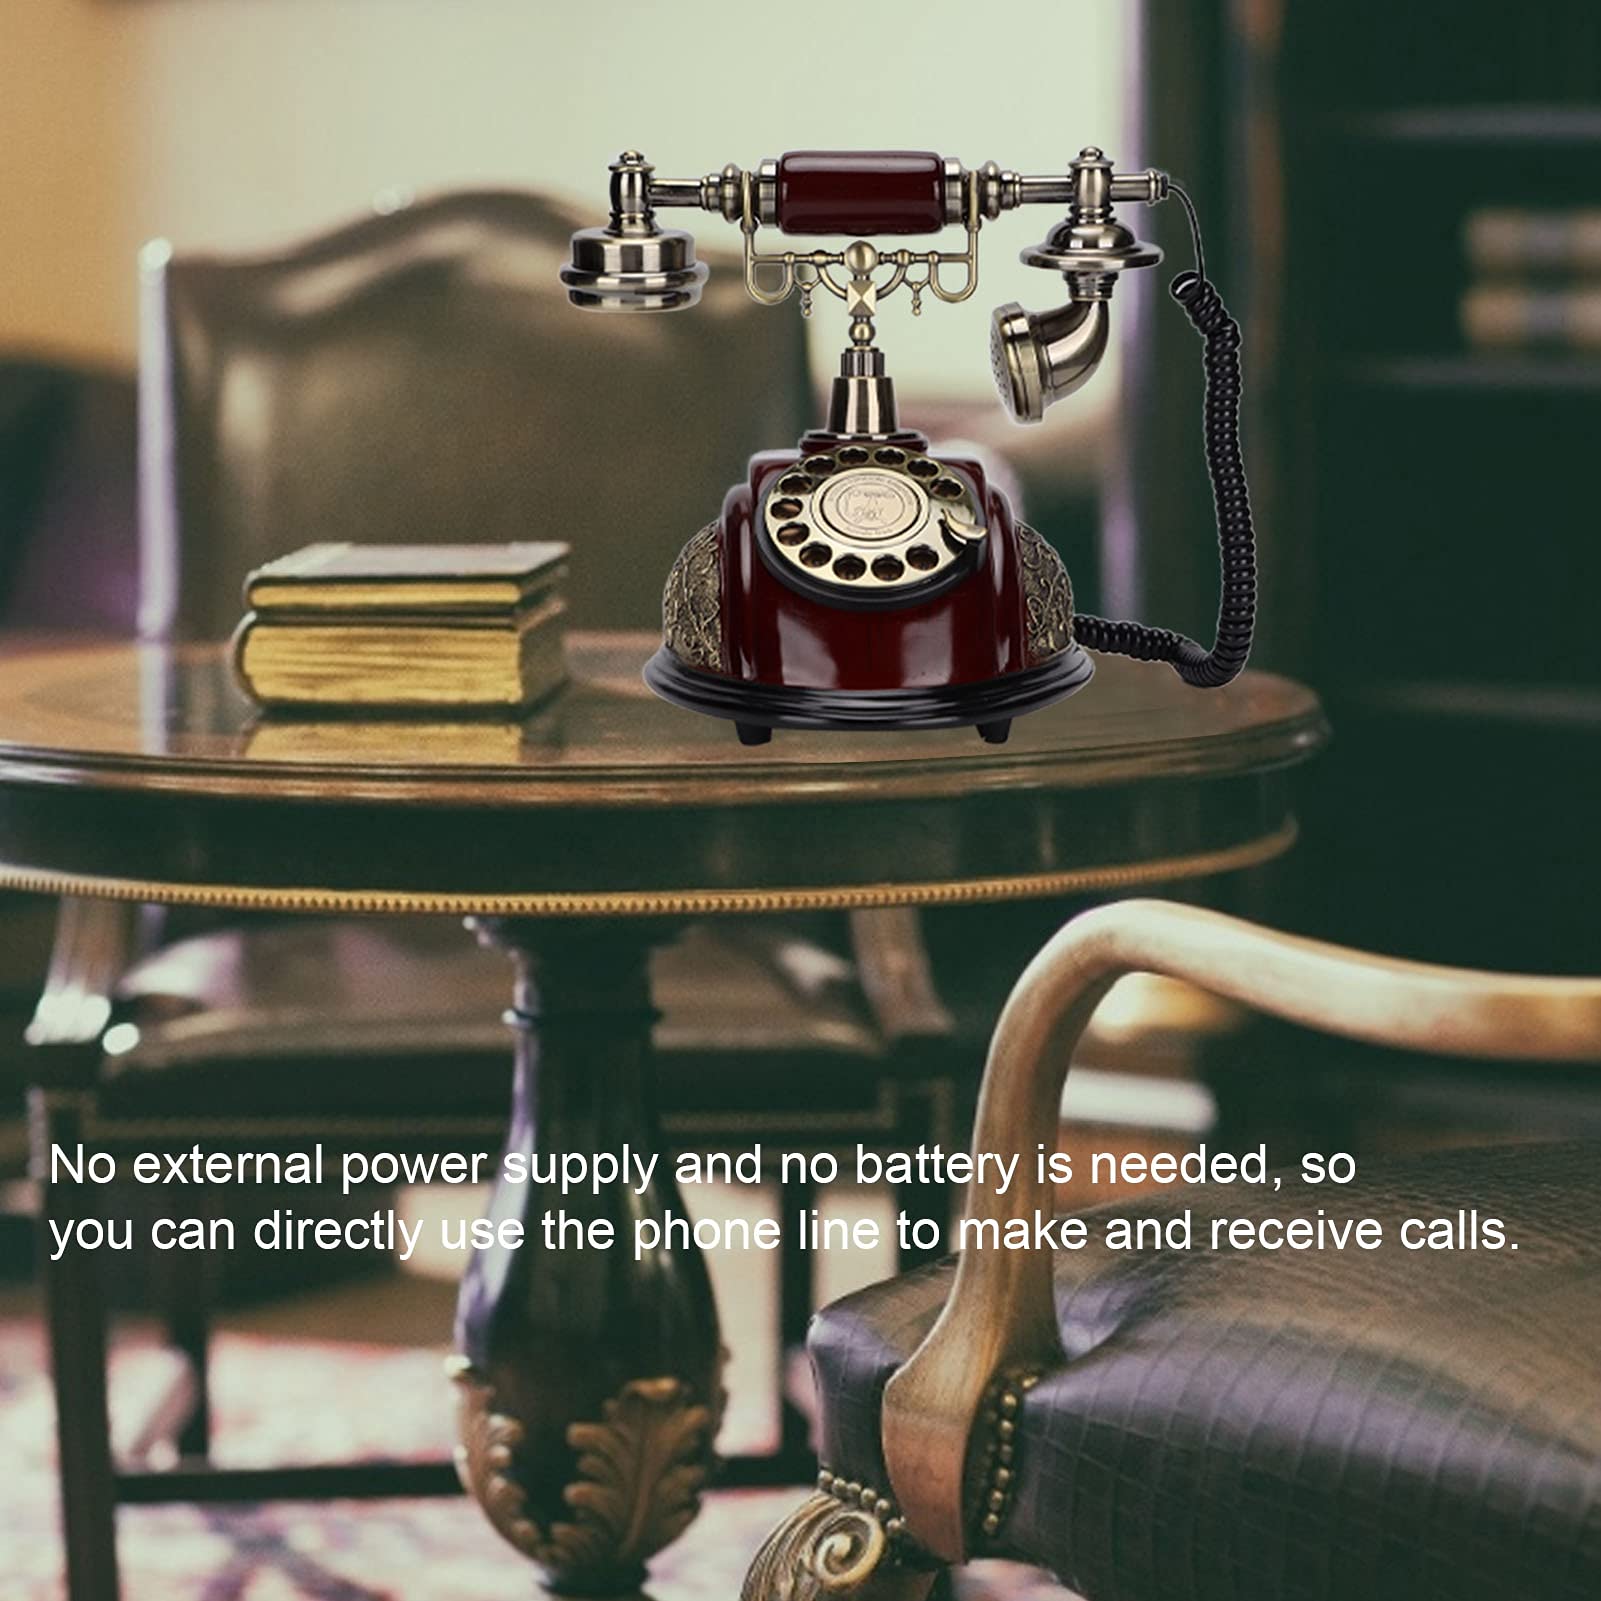 Dial Retro Old Fashioned Landline Telephone for Home Office Cafe Bar Decor,Retro Antique Phone,European Style Landline Telephone Decor Collectors Gift